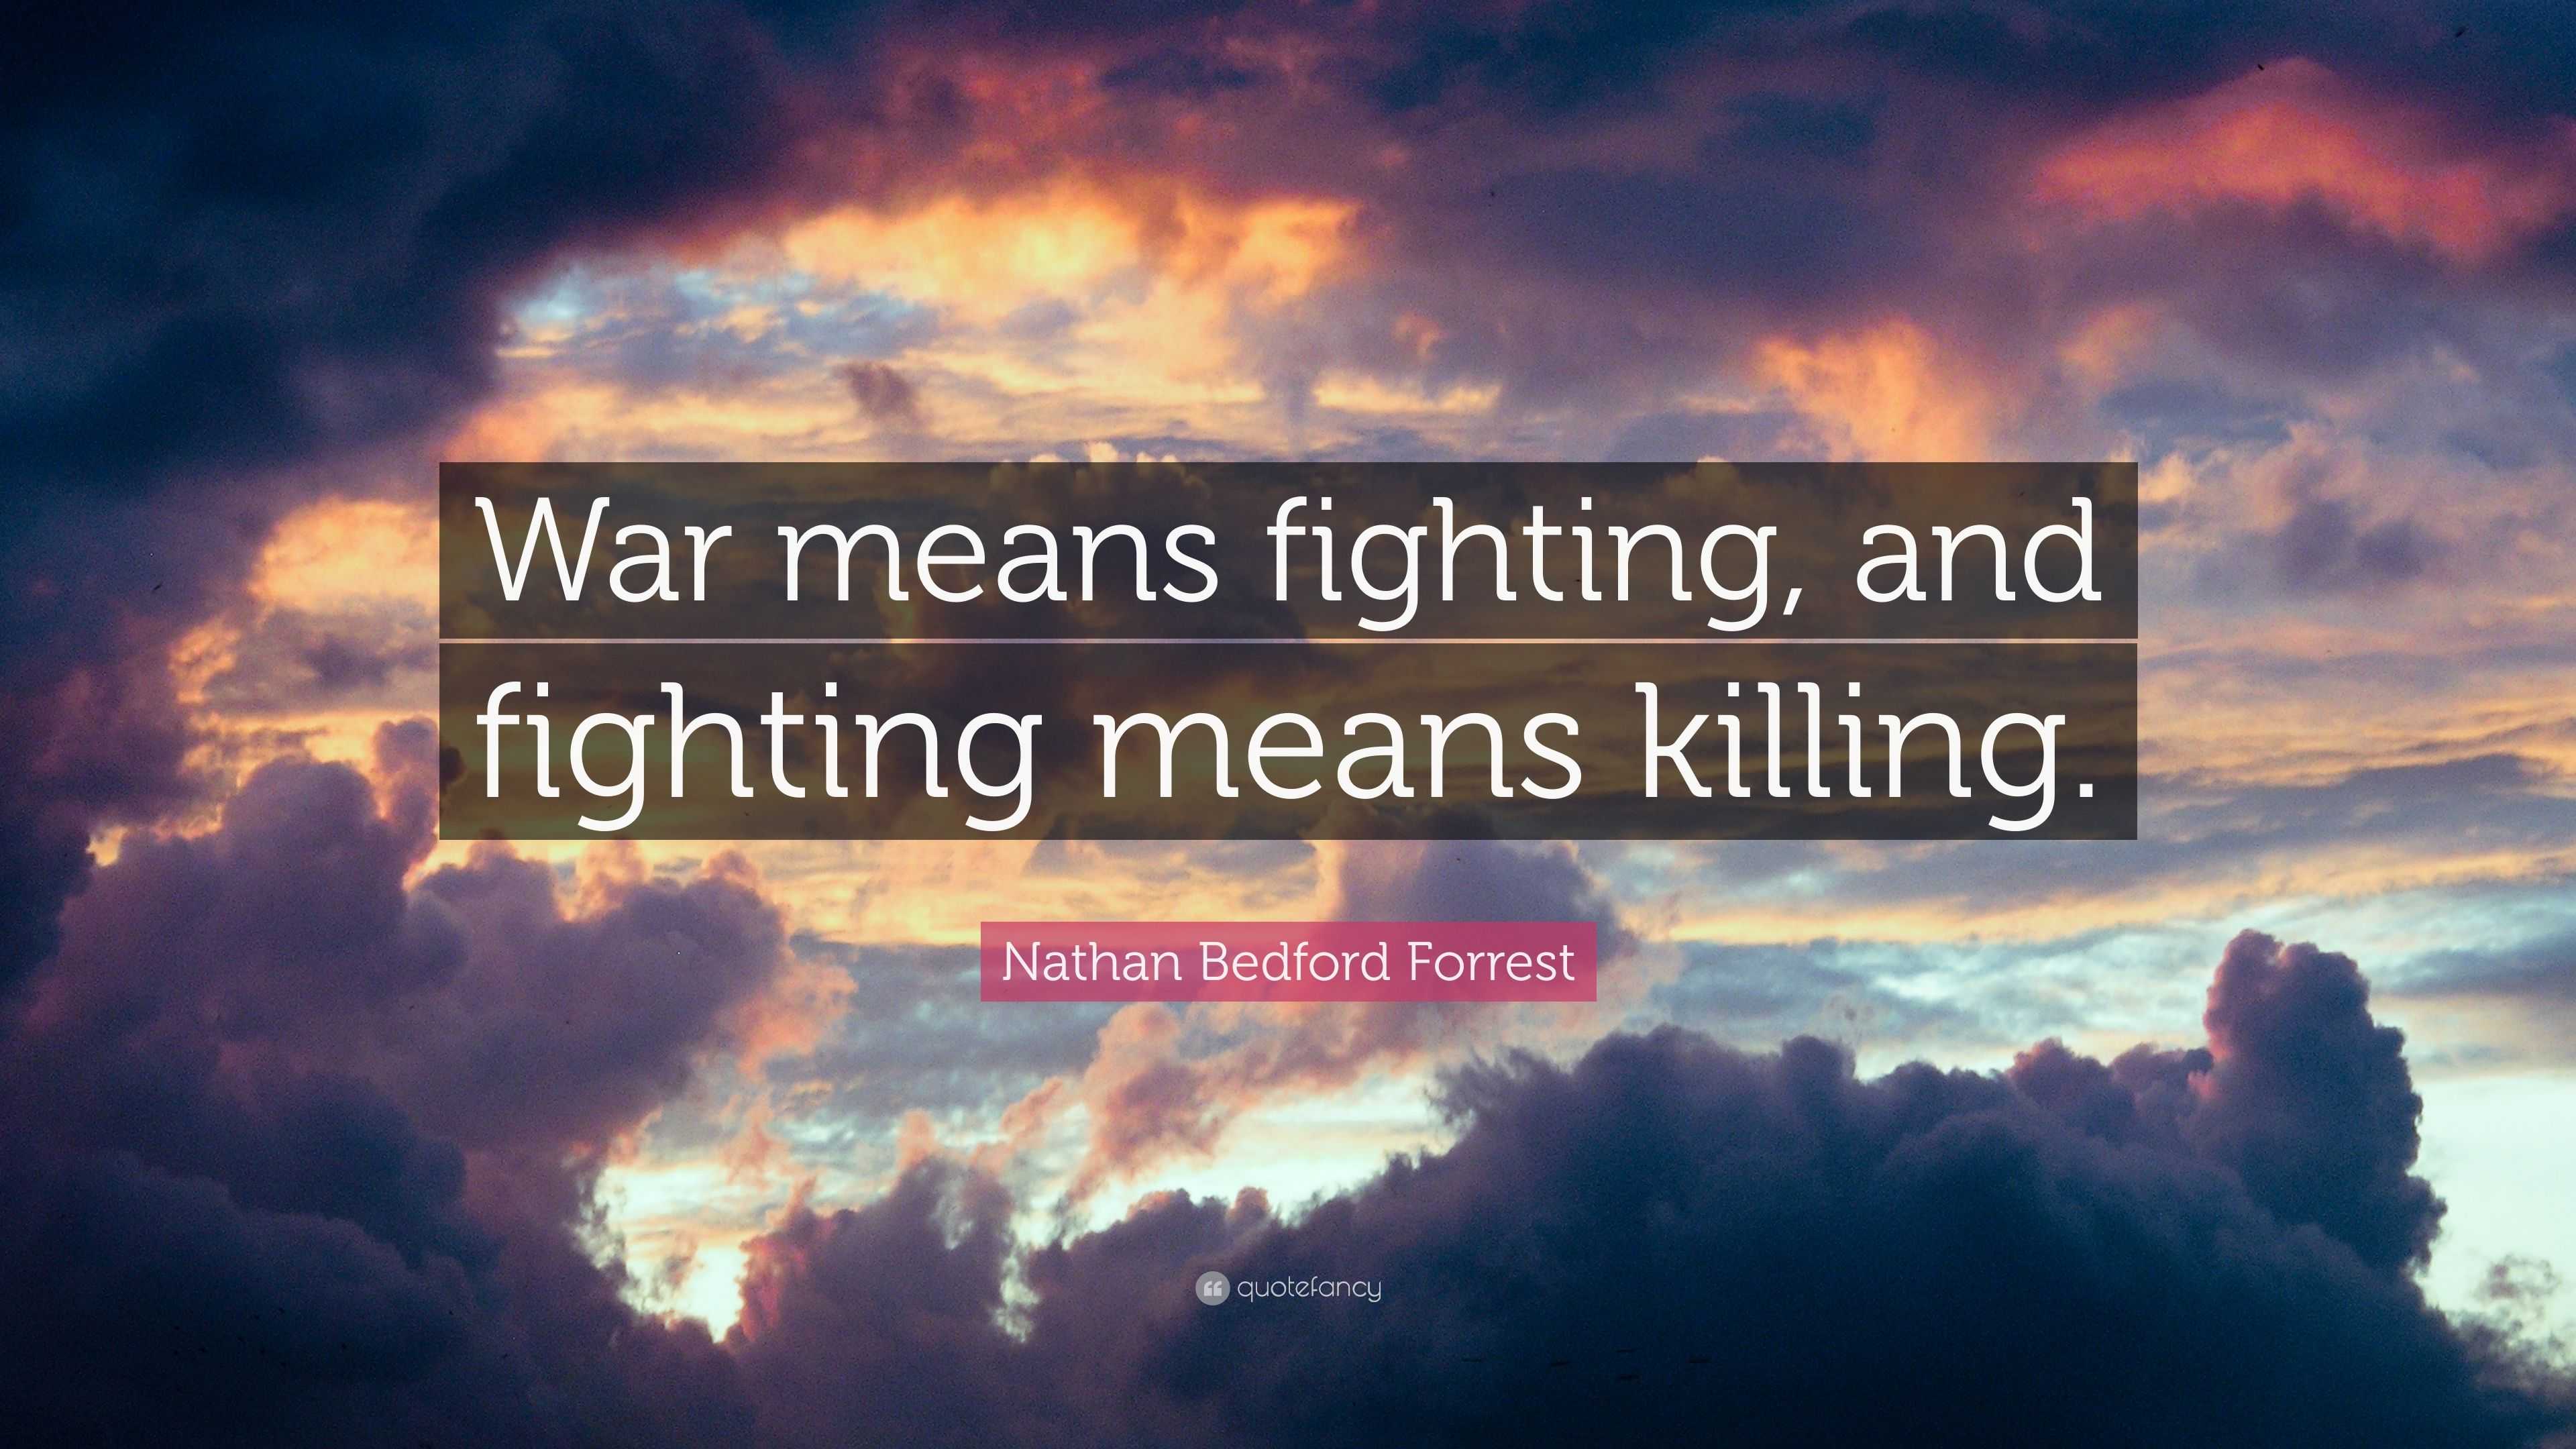 Nathan Bedford Forrest Quote: “War means fighting, and fighting means